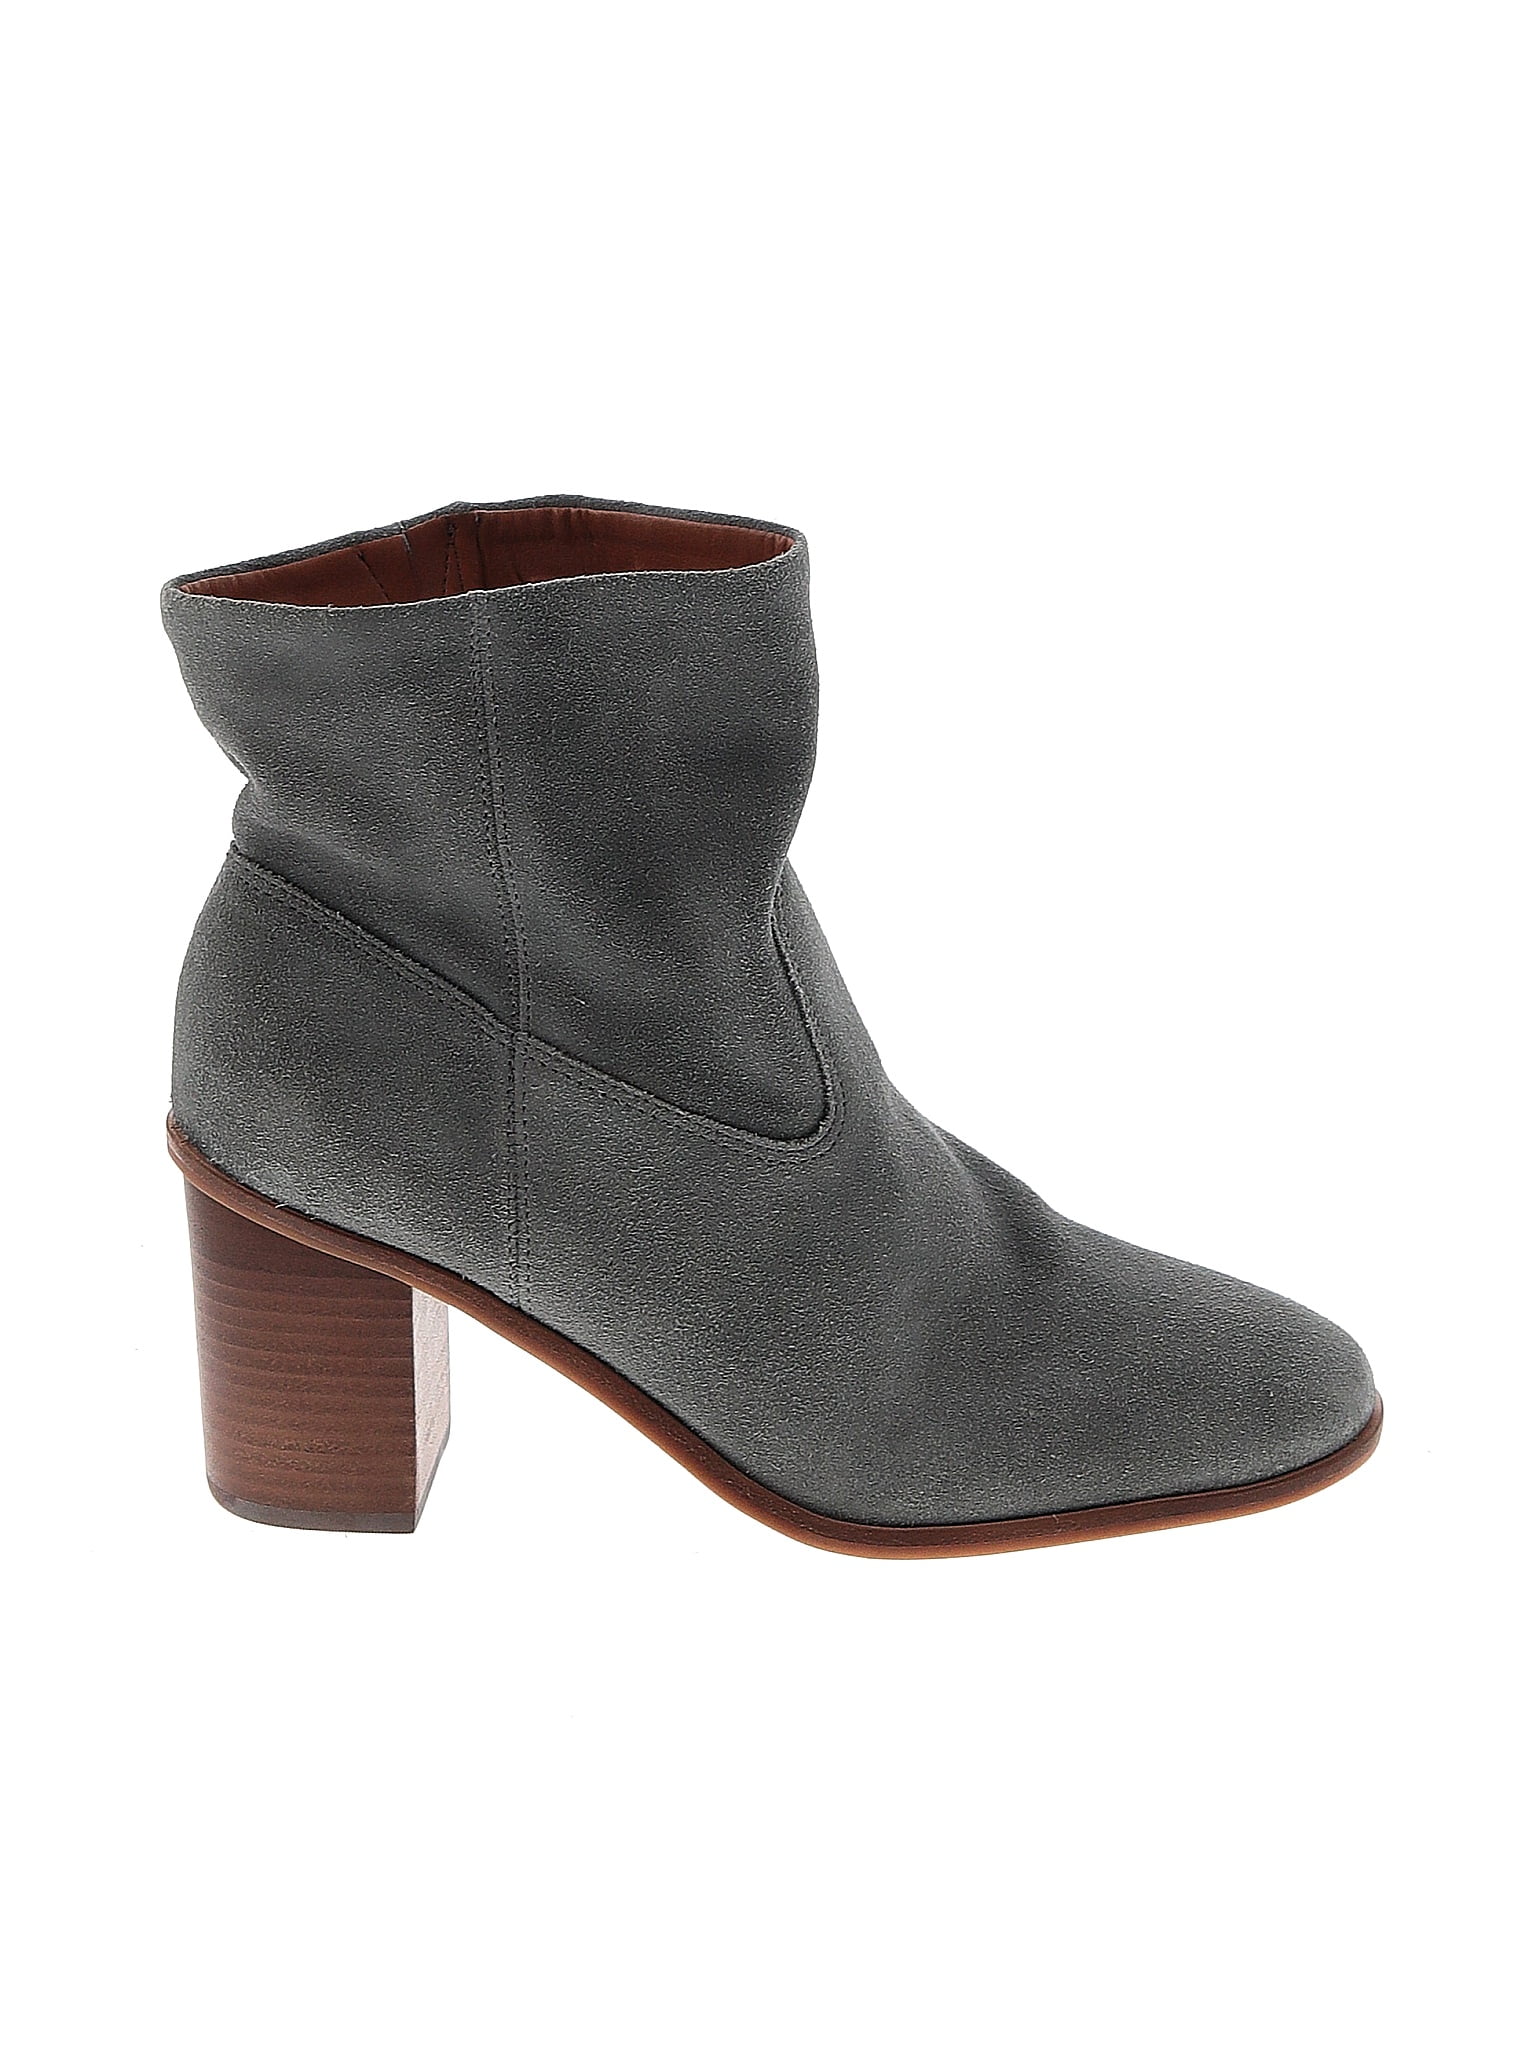 Lucky Brand Solid Gray Ankle Boots Size 8 - 66% off | thredUP